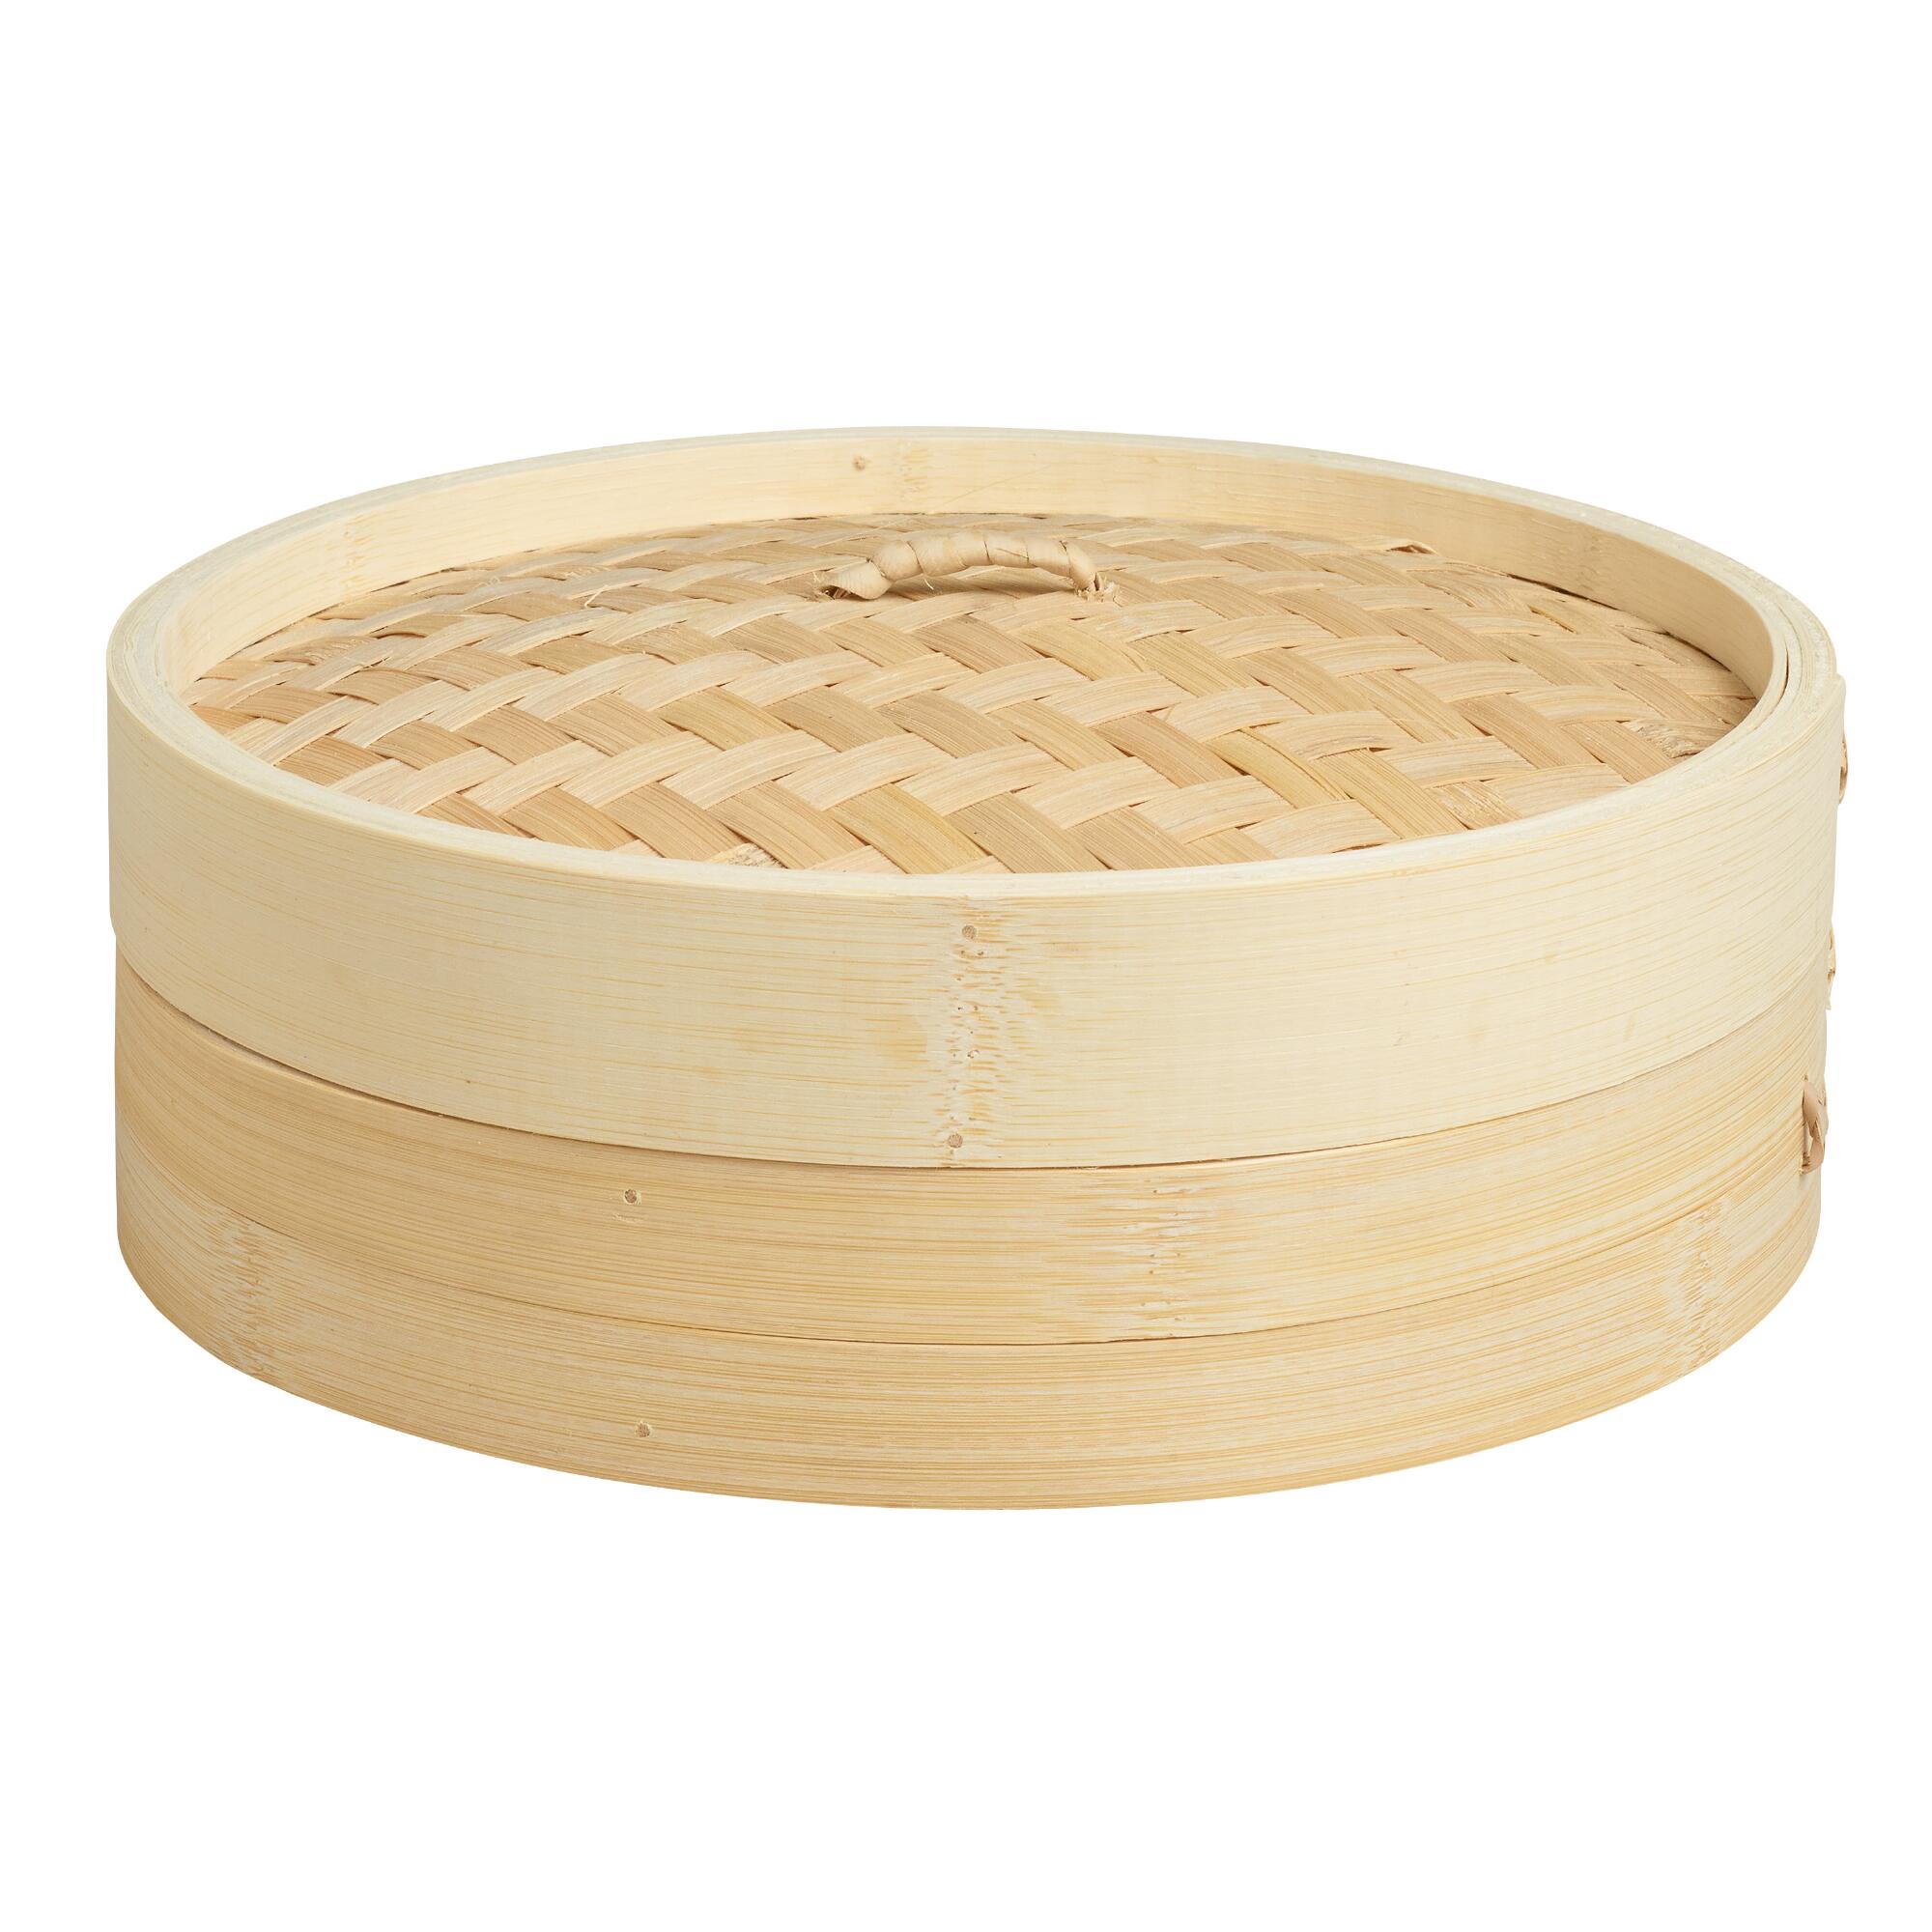 10-inch Bamboo Steamer: Natural by World Market